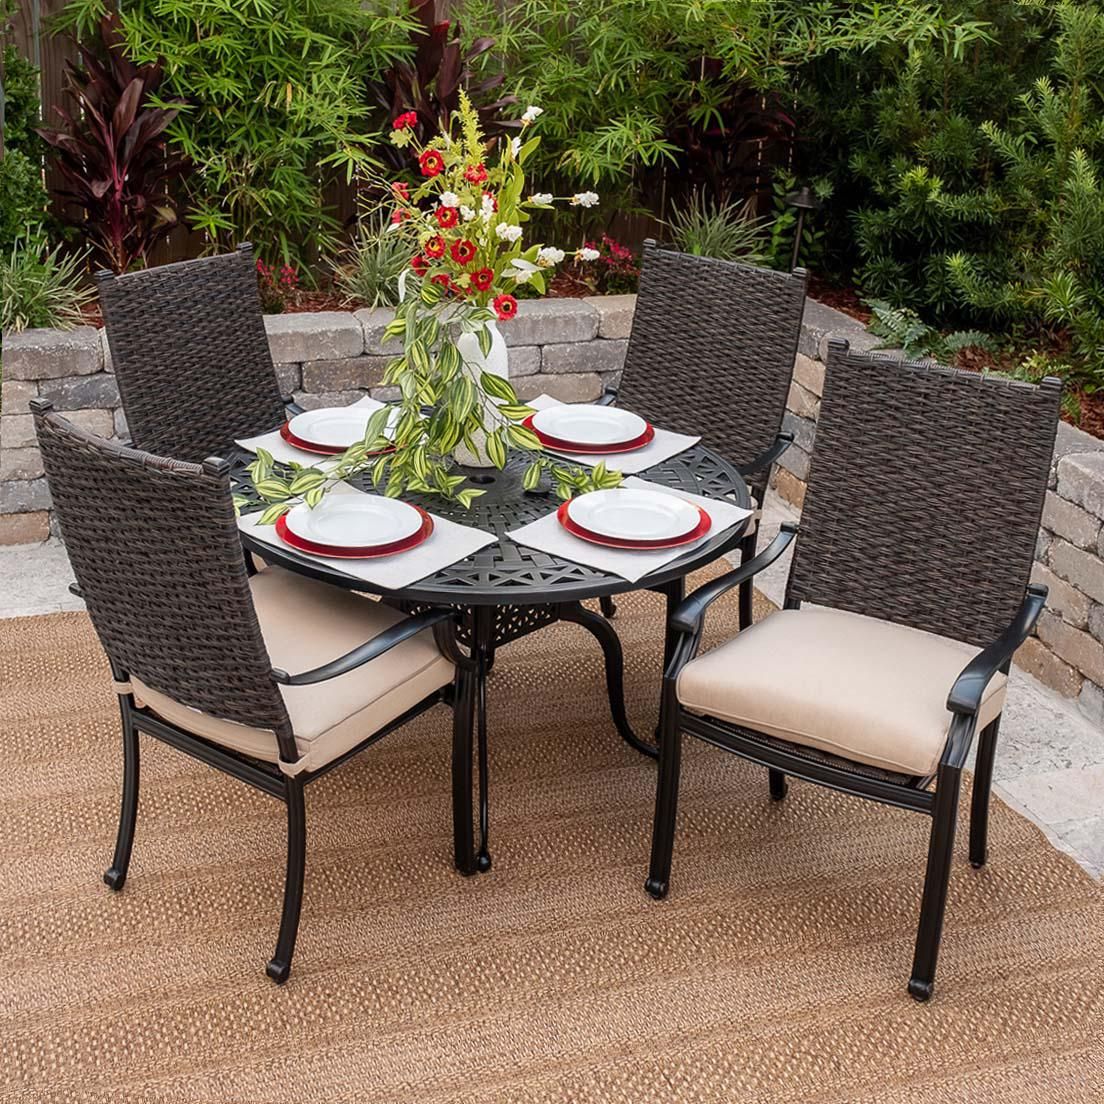 Famous Carondelet 5 Piece Wicker Patio Dining Set W/ 48 Inch Round Patio For Wicker 5 Piece Round Patio Dining Sets (View 4 of 15)